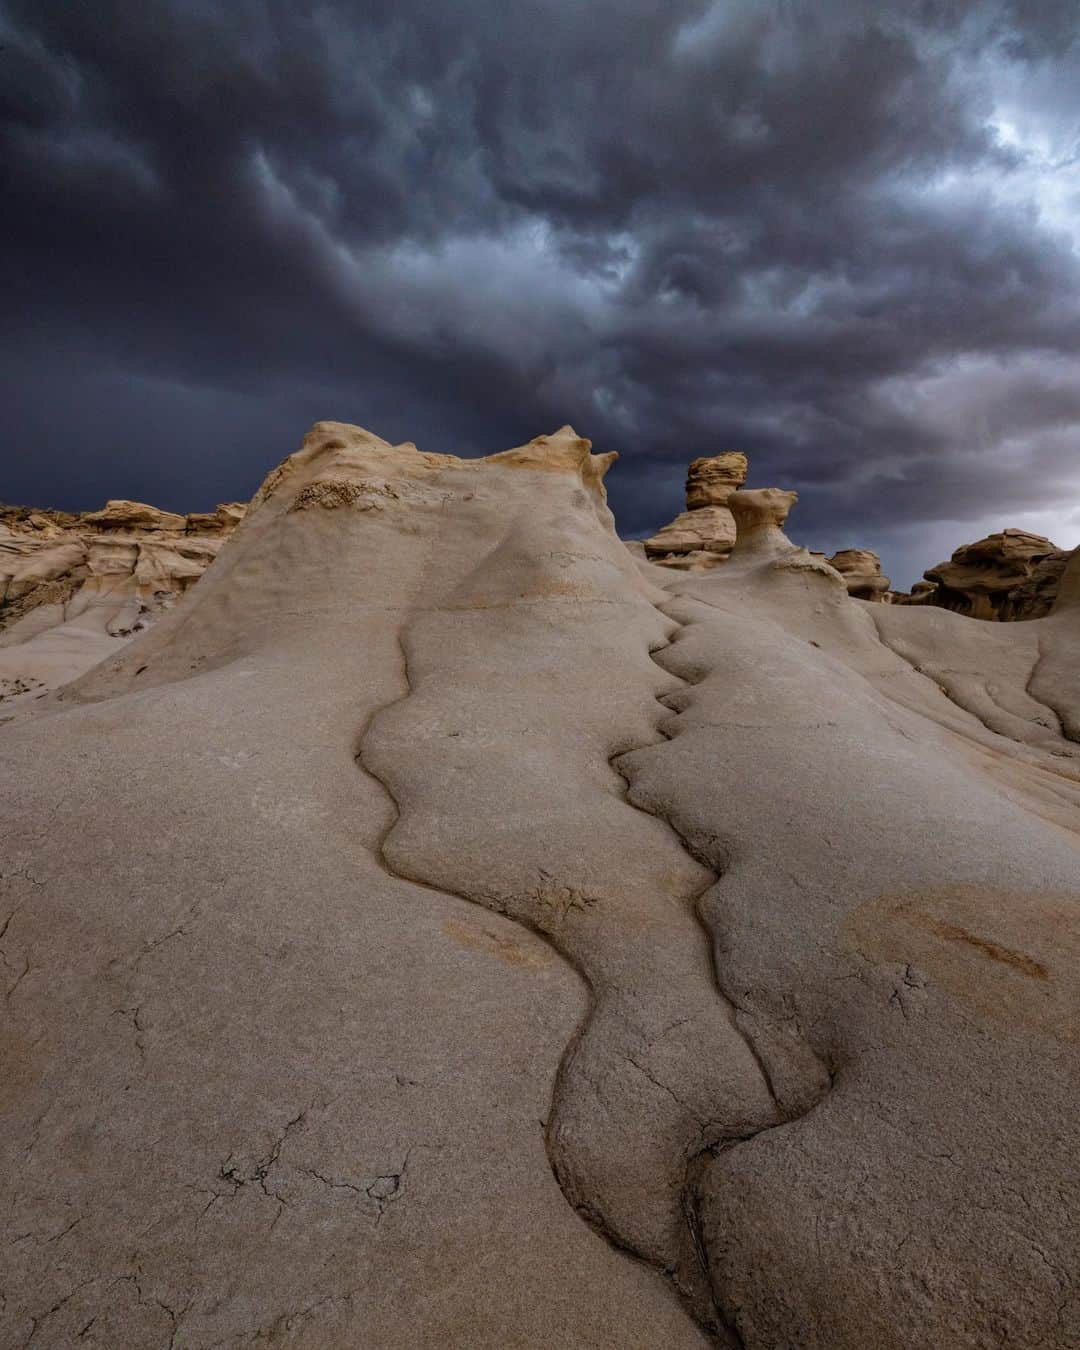 Keith Ladzinskiのインスタグラム：「Storm clouds decorating the skies over the Great Basin Desert, New Mexico」